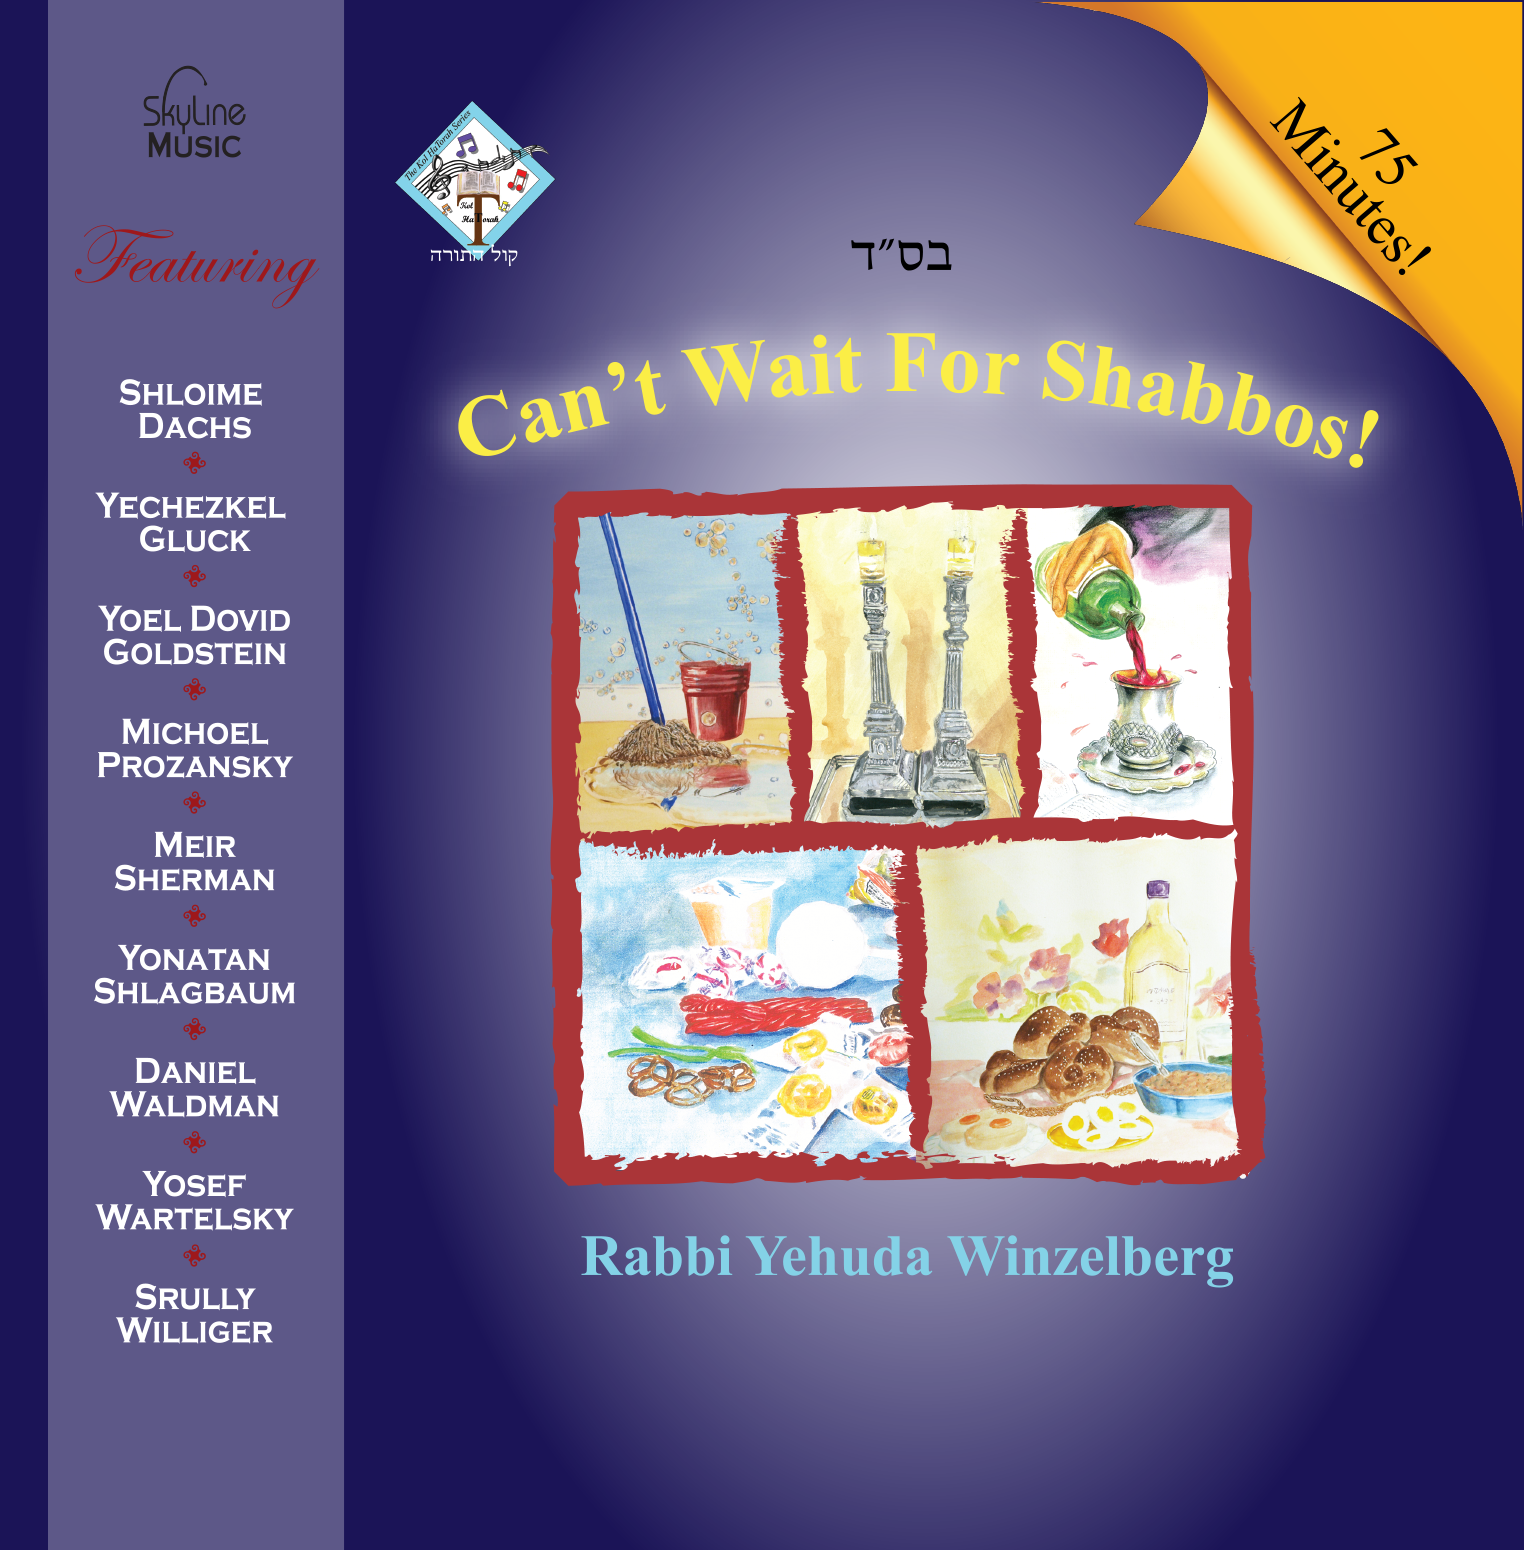 R' Yehuda Winzelberg - Can't Wait For Shabbos!